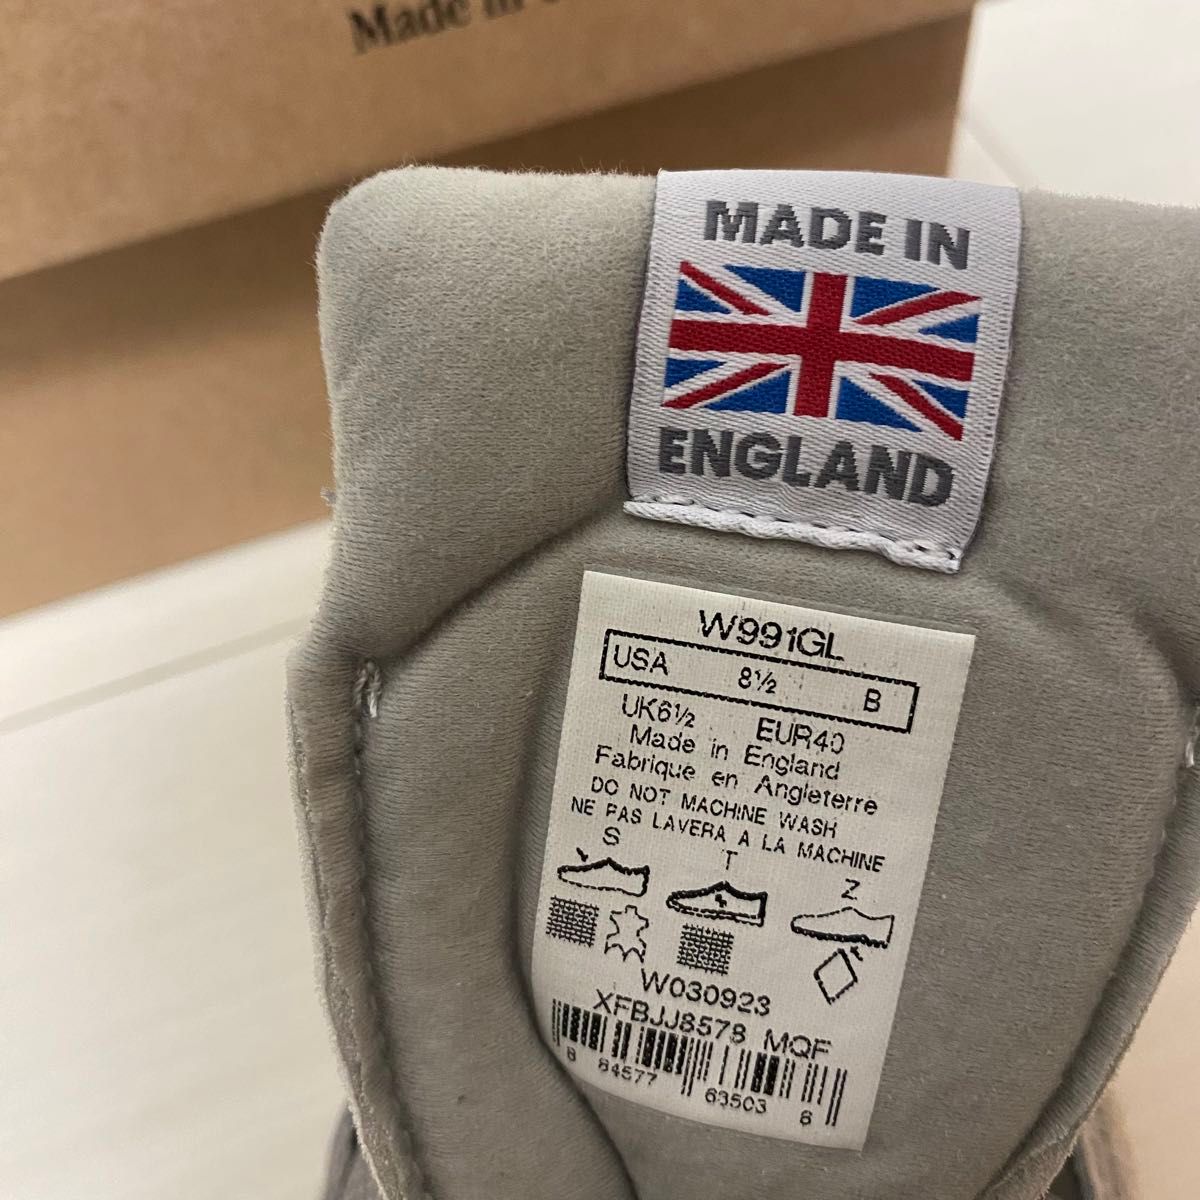 made in UK NEW BALANCE 991 W991GL WUS8.5